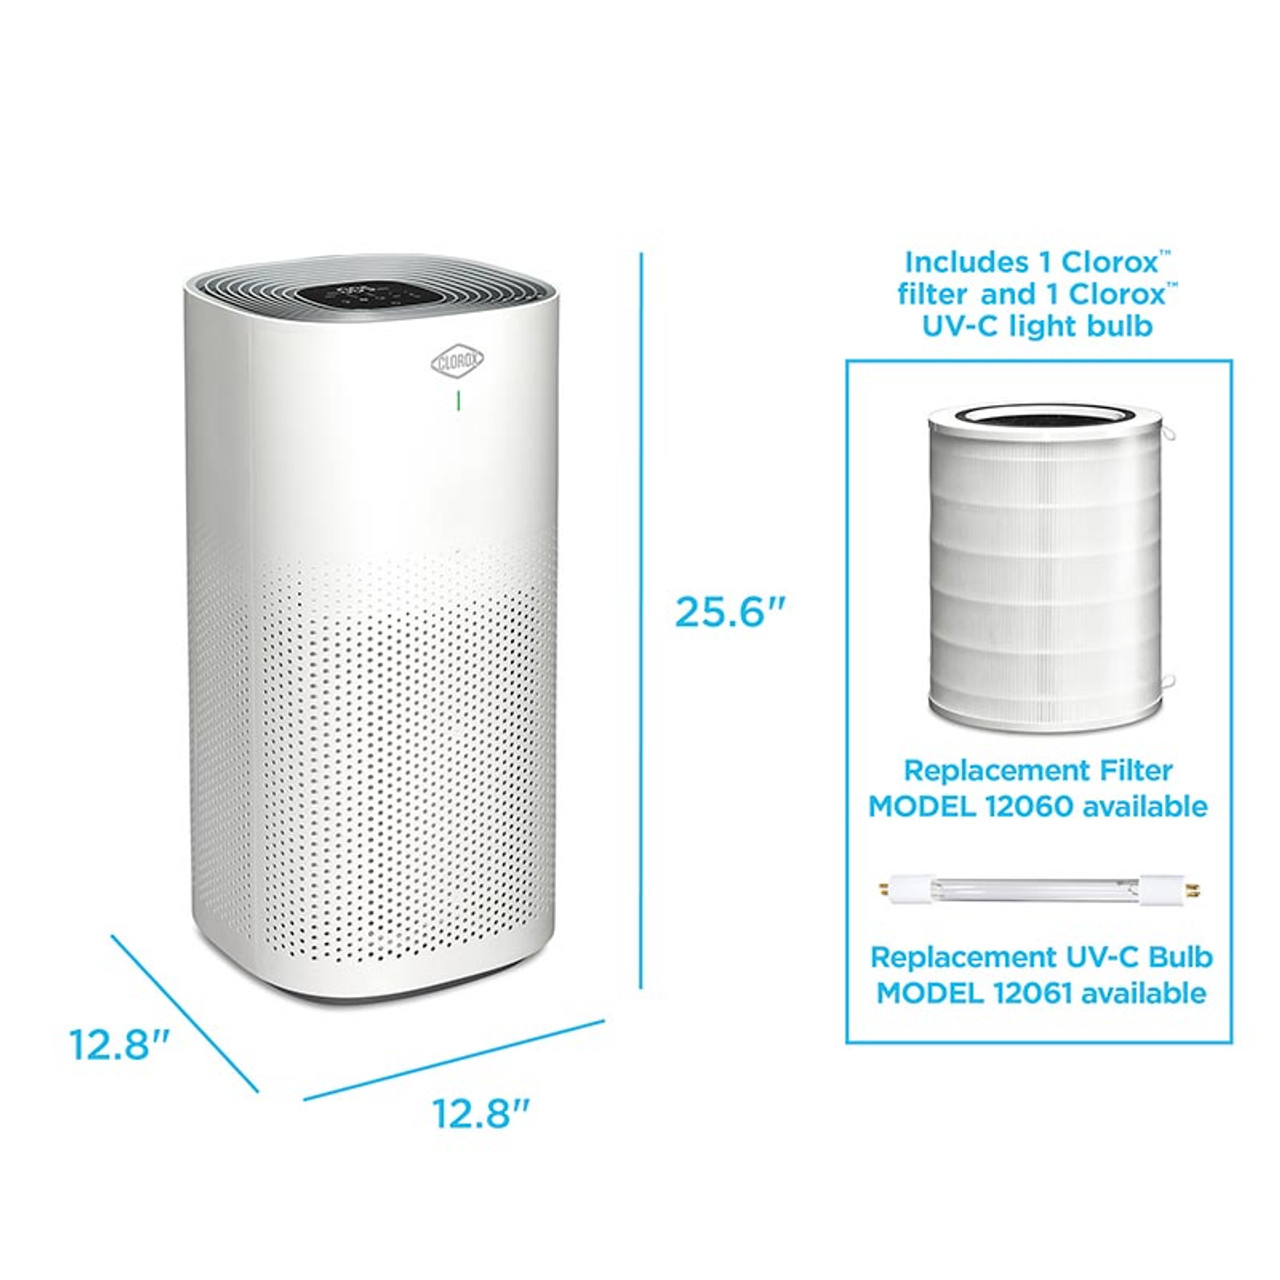 The purifier is 25.6 inches tall and 12.8 inches in diameter, the box includes 1 filter model number 12060 and one UV-C bulb model number 12061